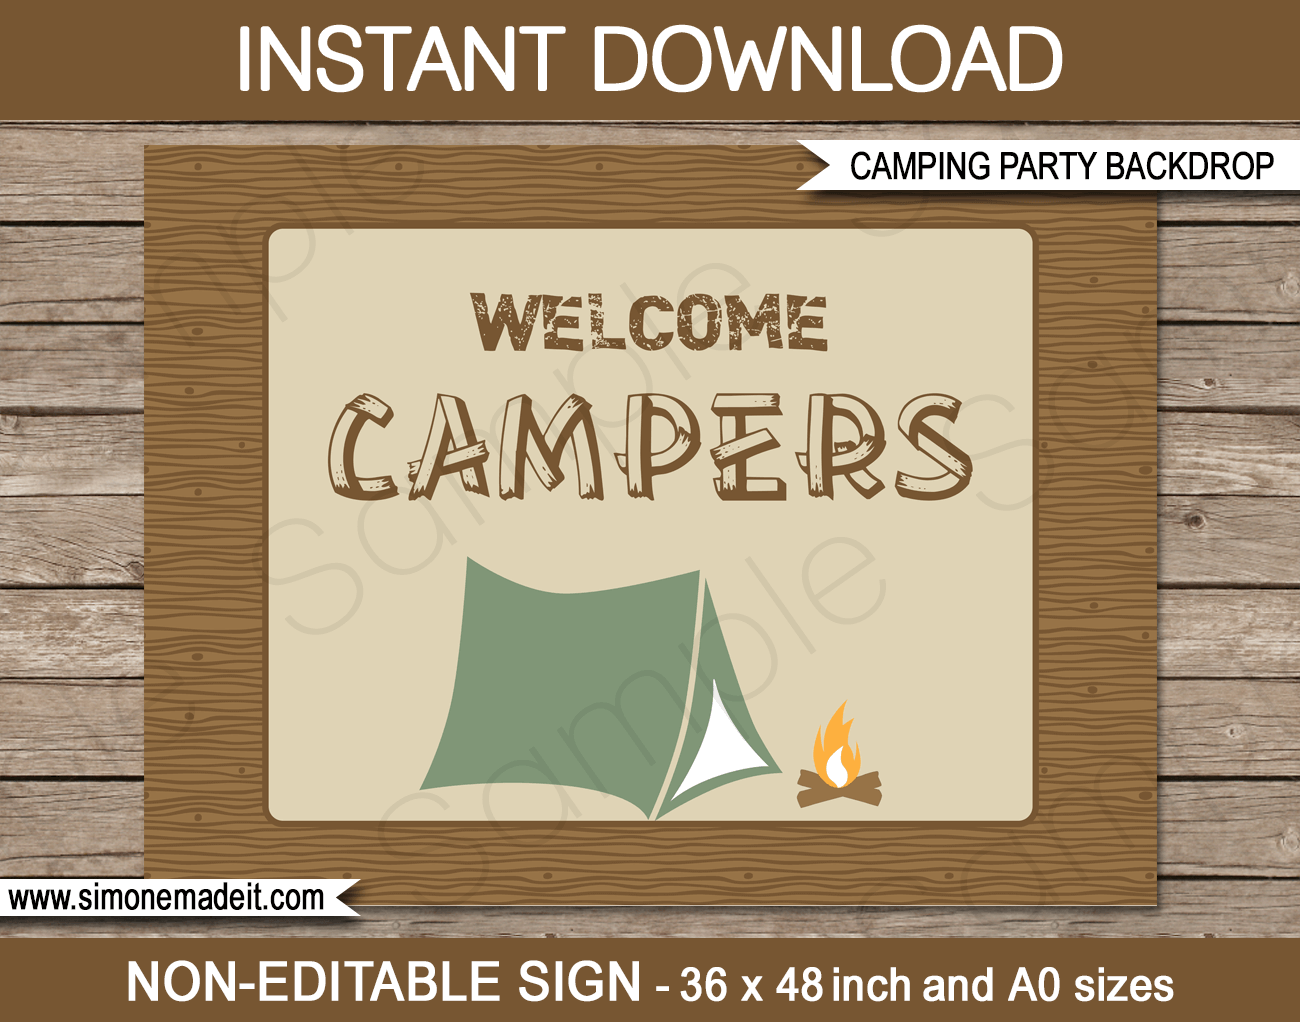 Printable Camping Party Backdrop - Welcome Campers | DIY Template | Party Decorations | 36x48 inches | A0 | $4.50 Instant Download via SIMONEmadeit.com